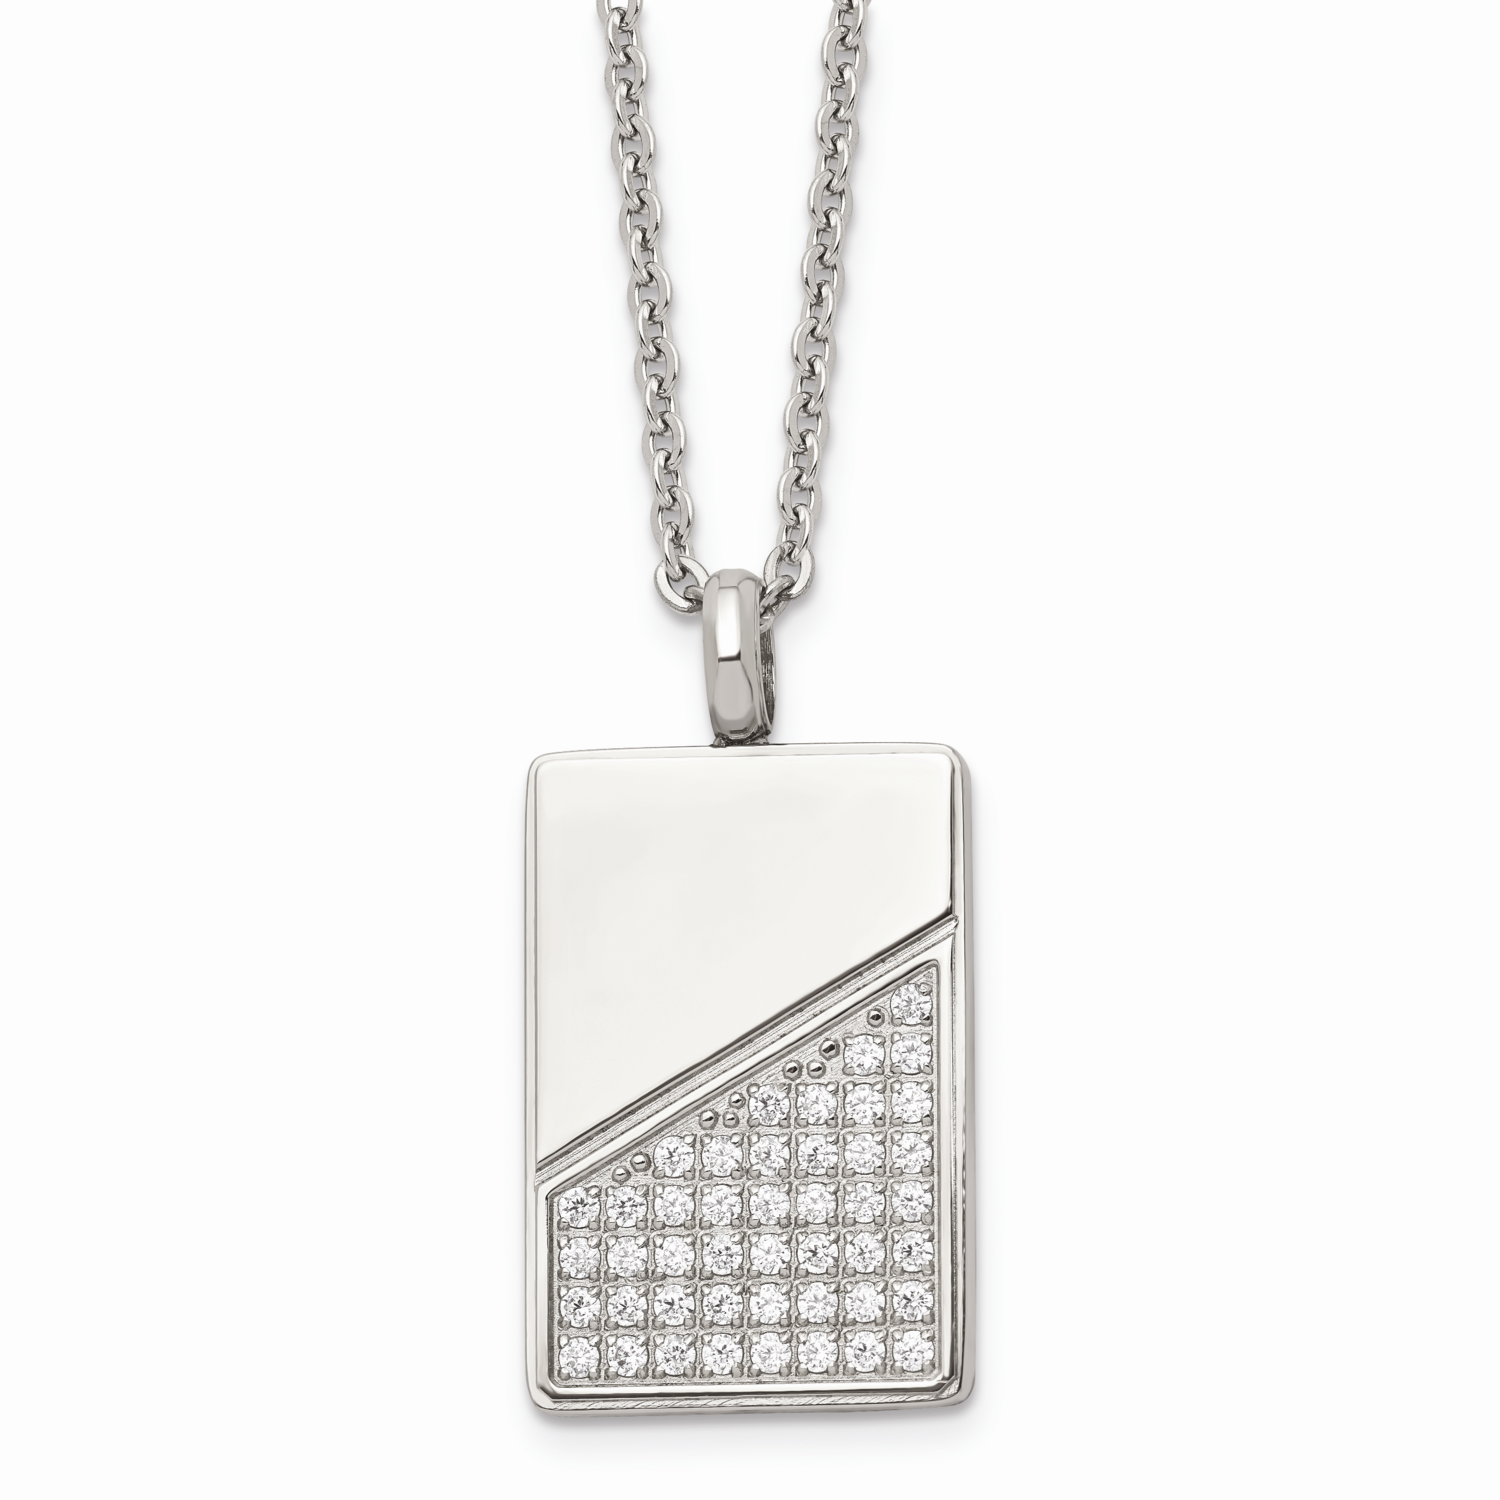 Dog Tag with CZ Stone Stone Necklace Stainless Steel SRN1400-20